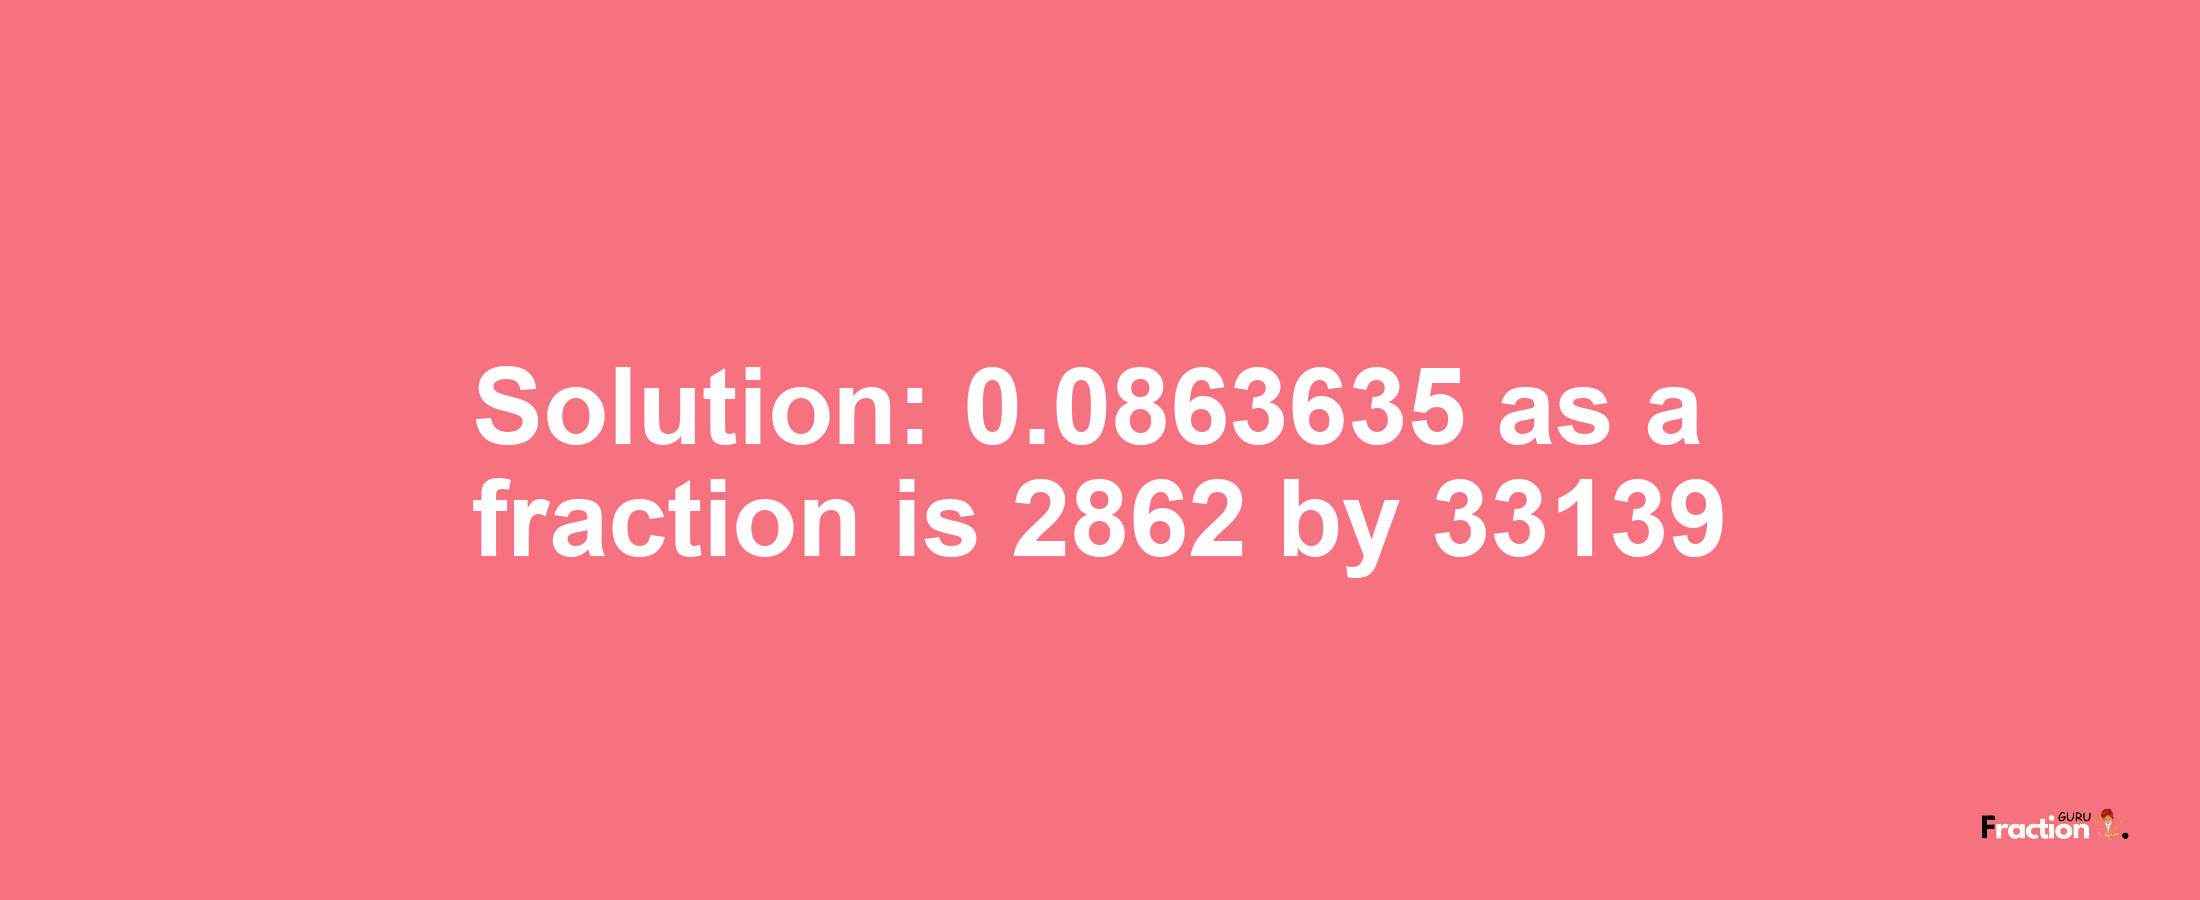 Solution:0.0863635 as a fraction is 2862/33139